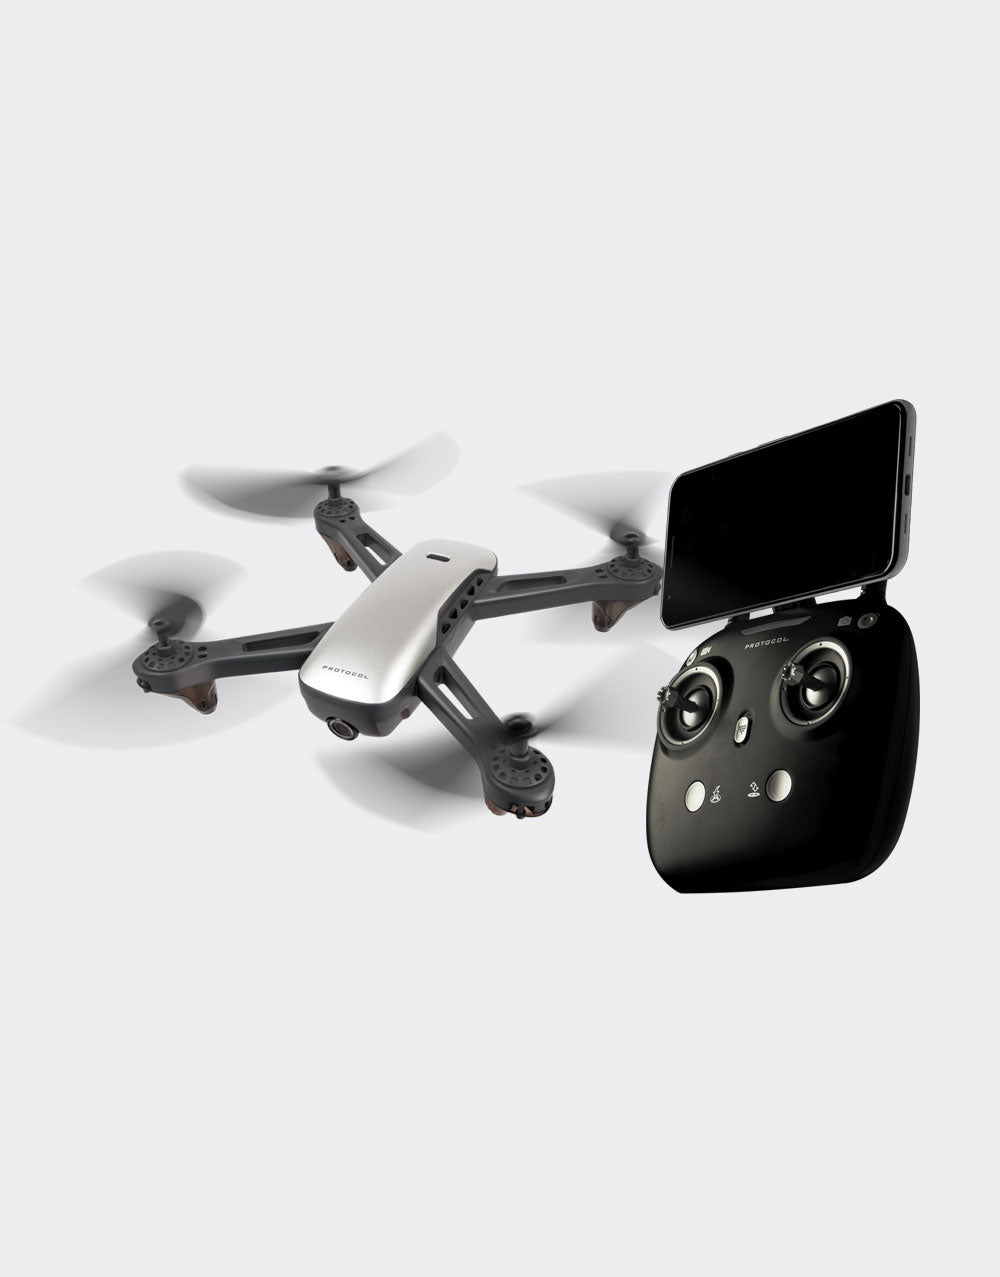 VideoDrone GPS Wi-Fi Drone with Live Streaming HD Camera